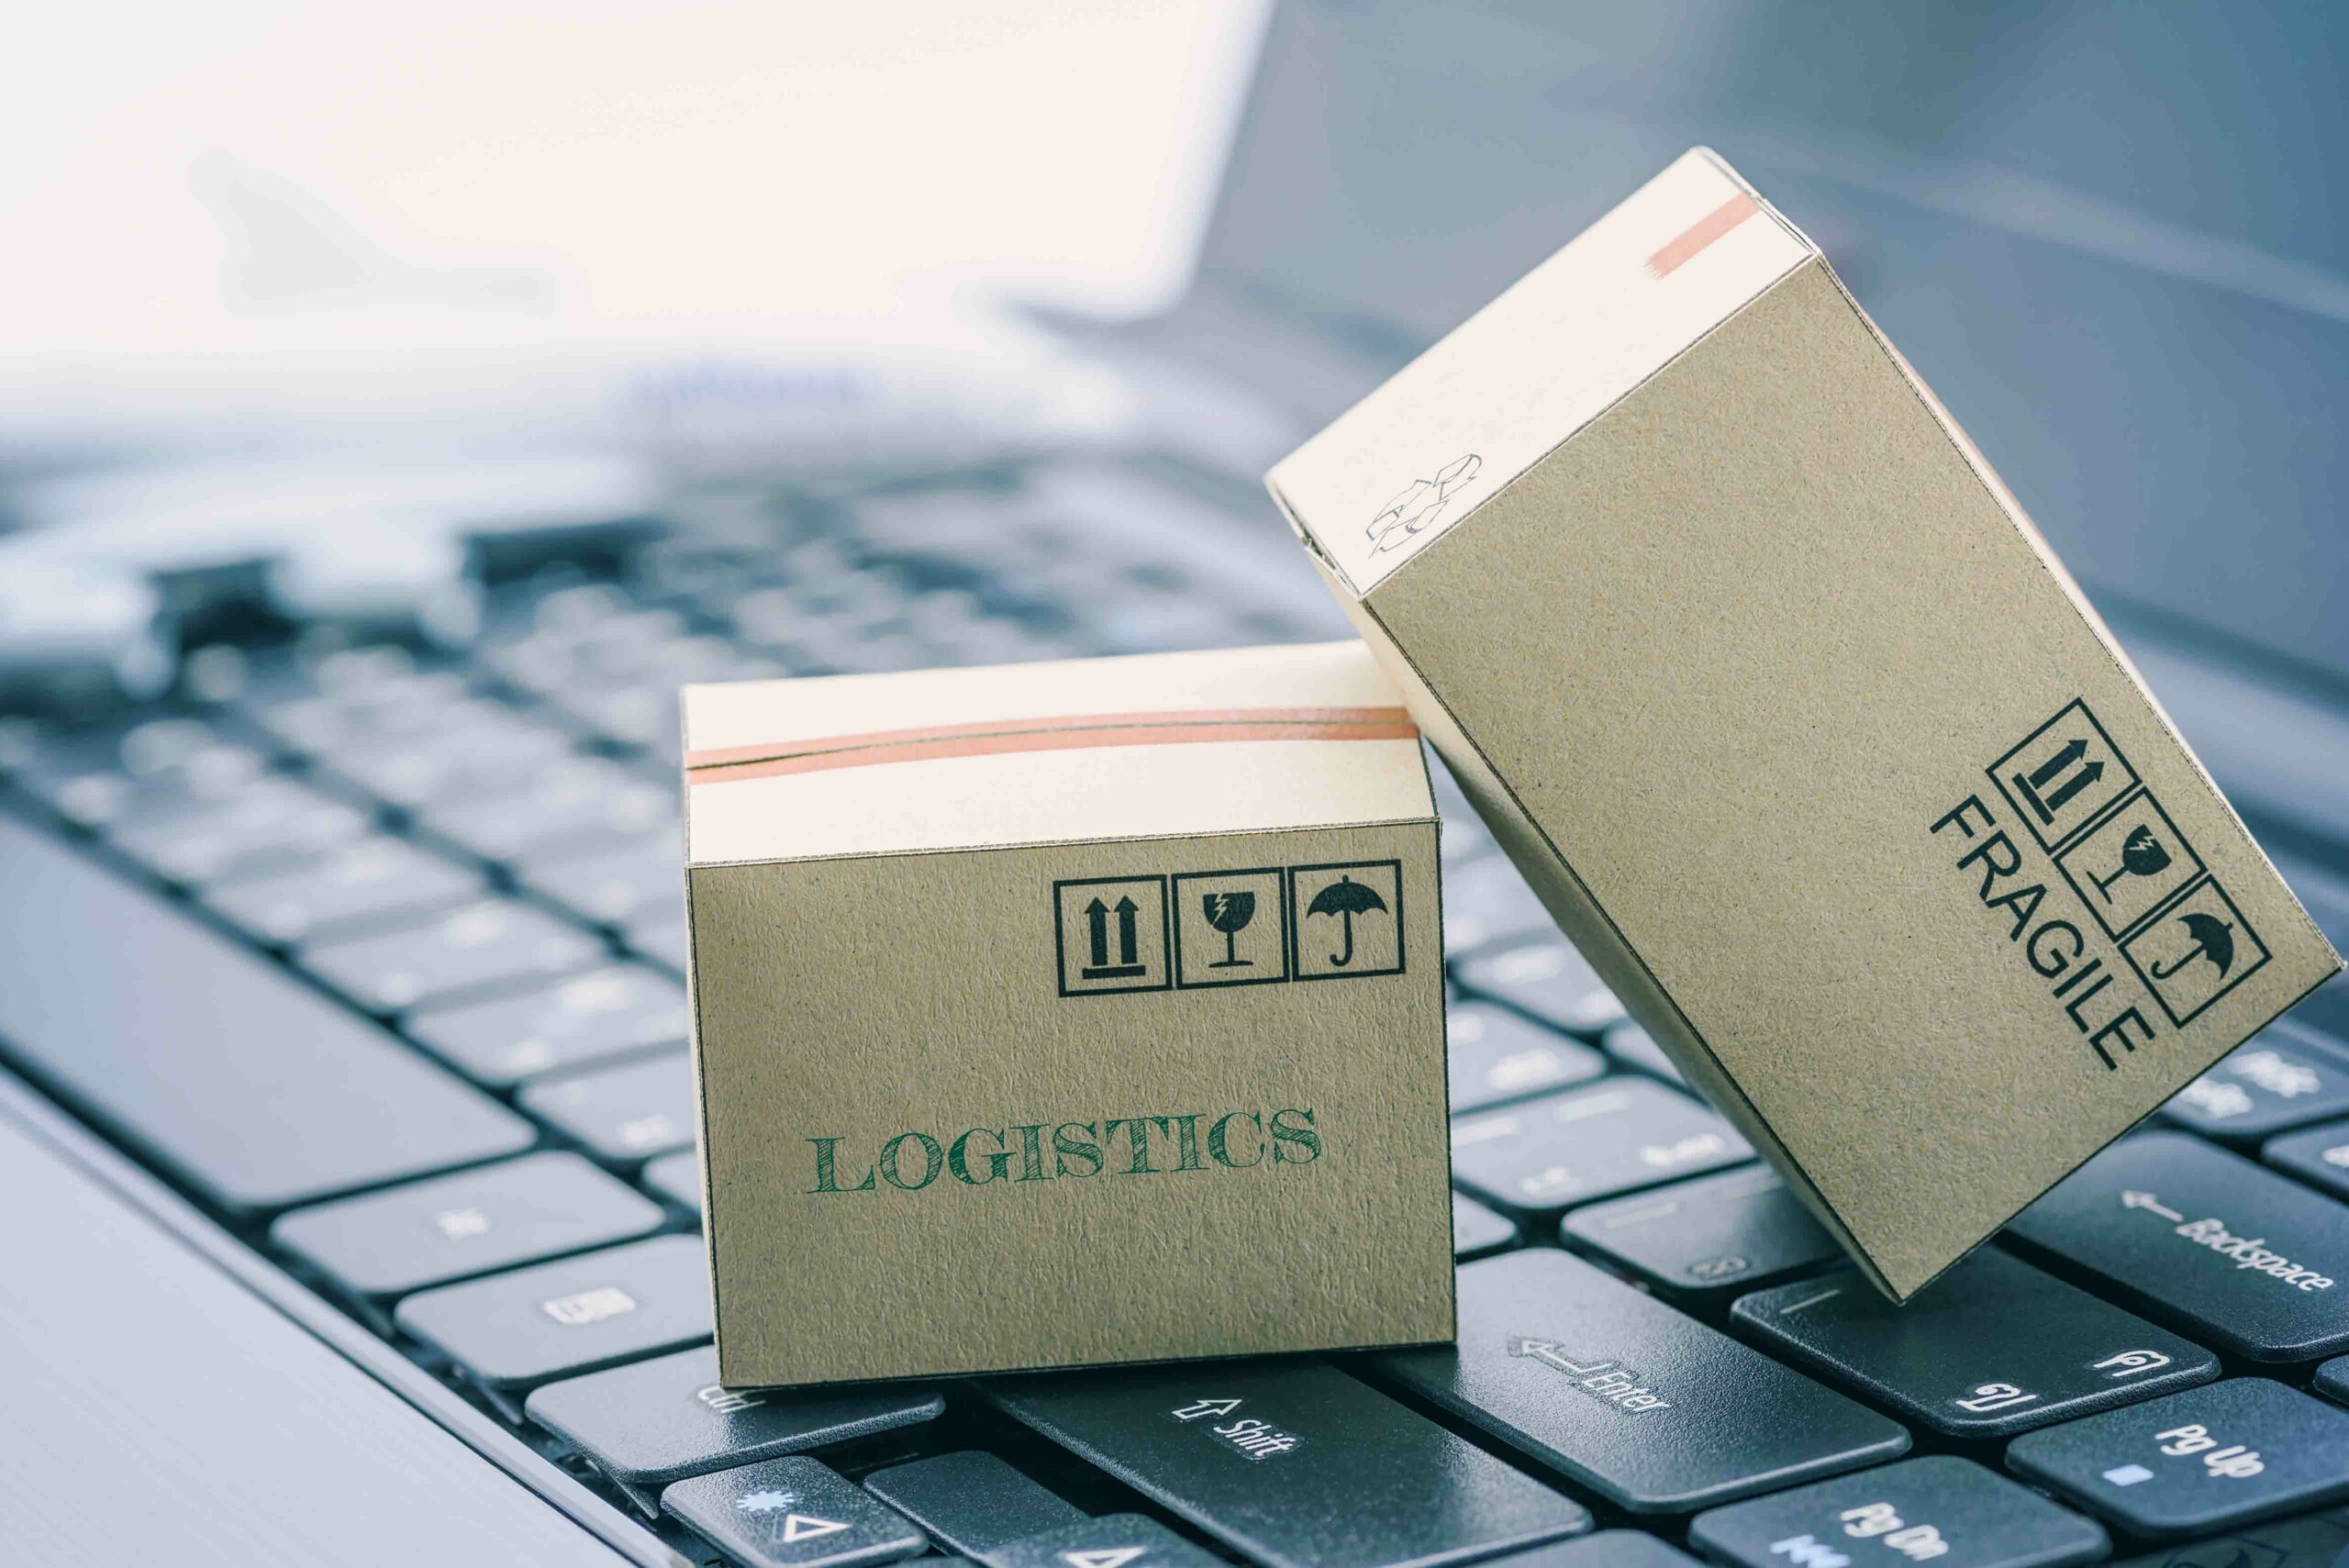 ZIM launches digital freight forwarding business Atlas Logistic Network